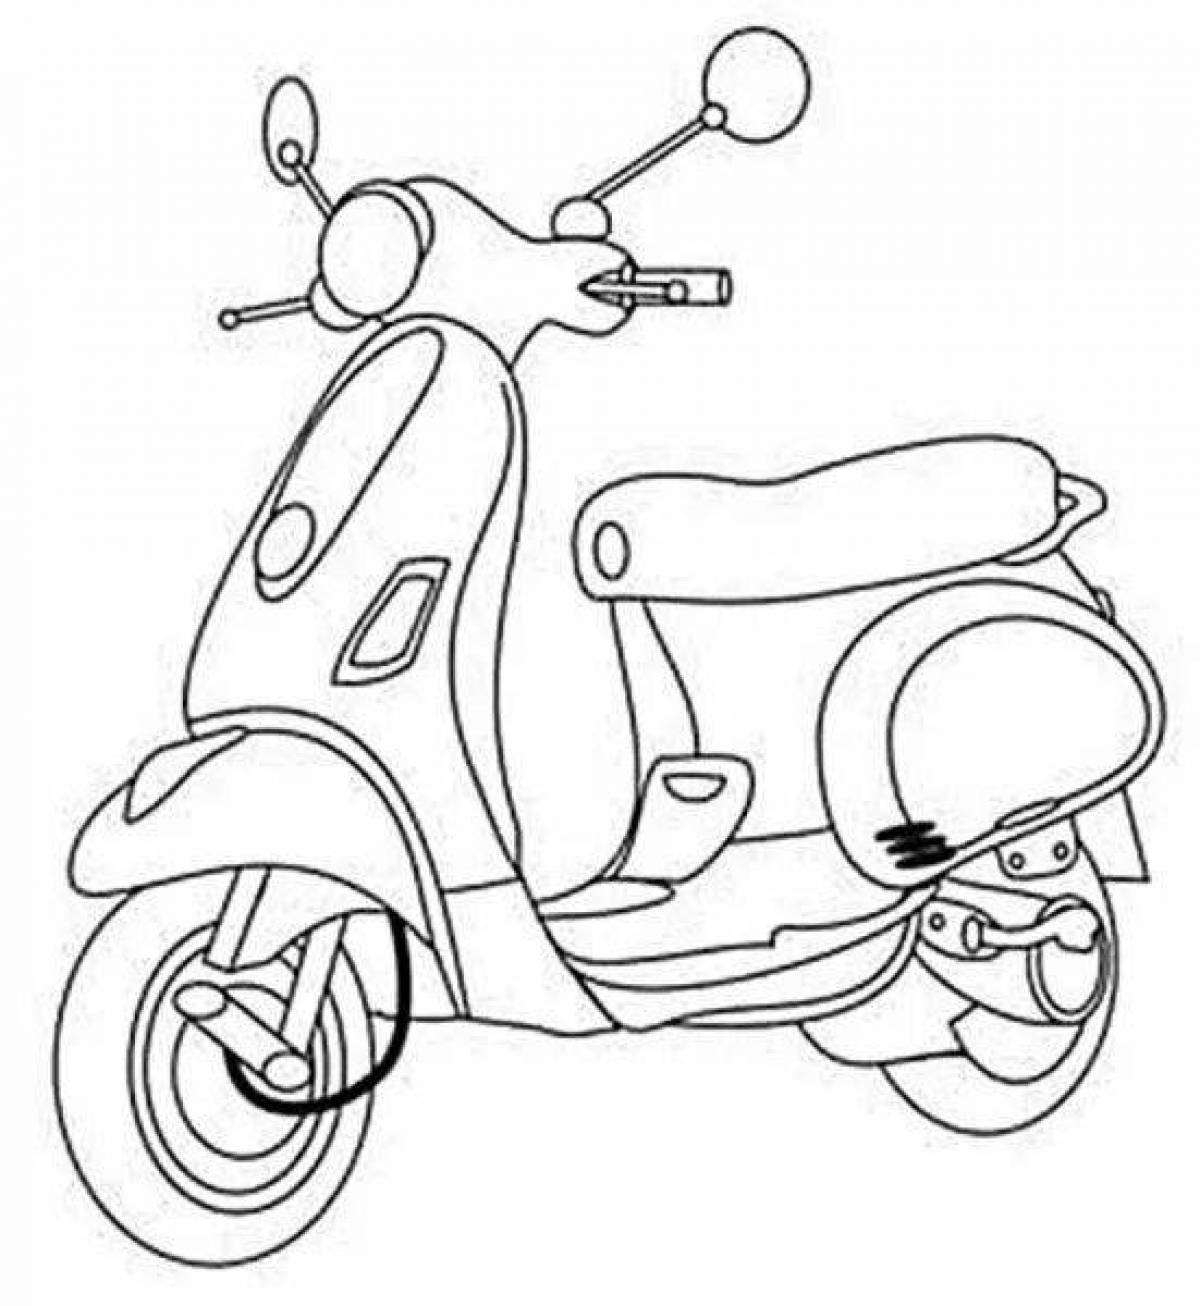 Adorable moped coloring page